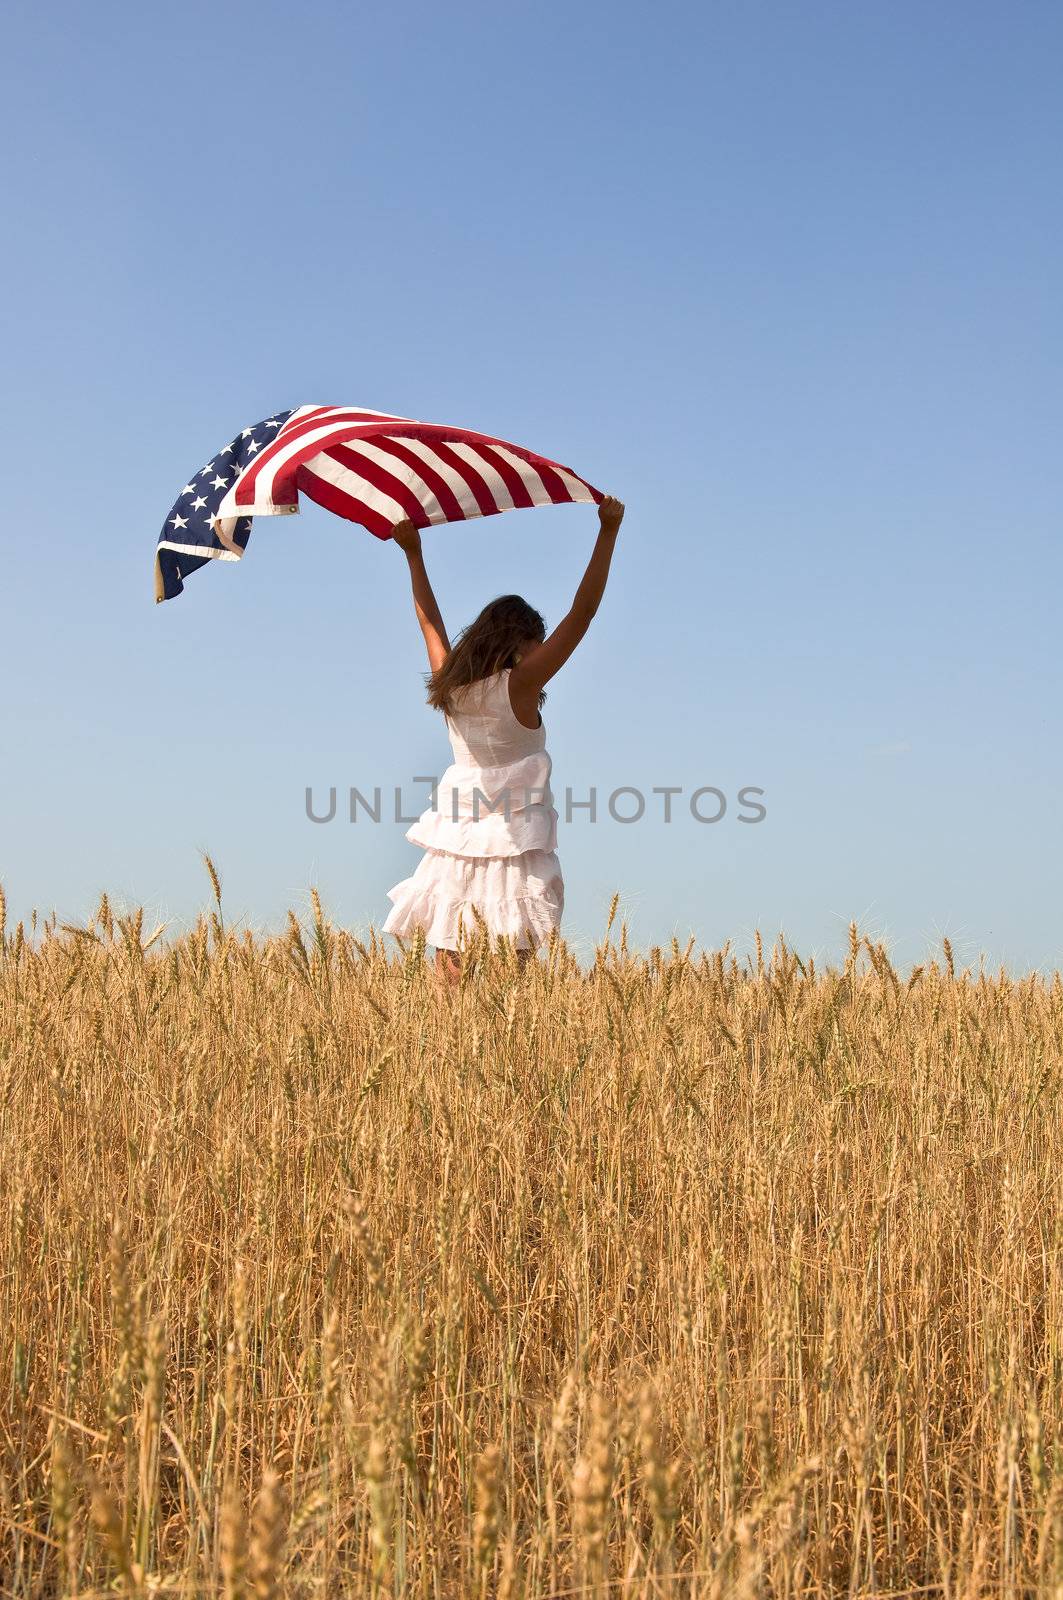 Beautiful young girl holding an American flag in the wind in a field of rye. Summer landscape against the blue sky. Vertical orientation.